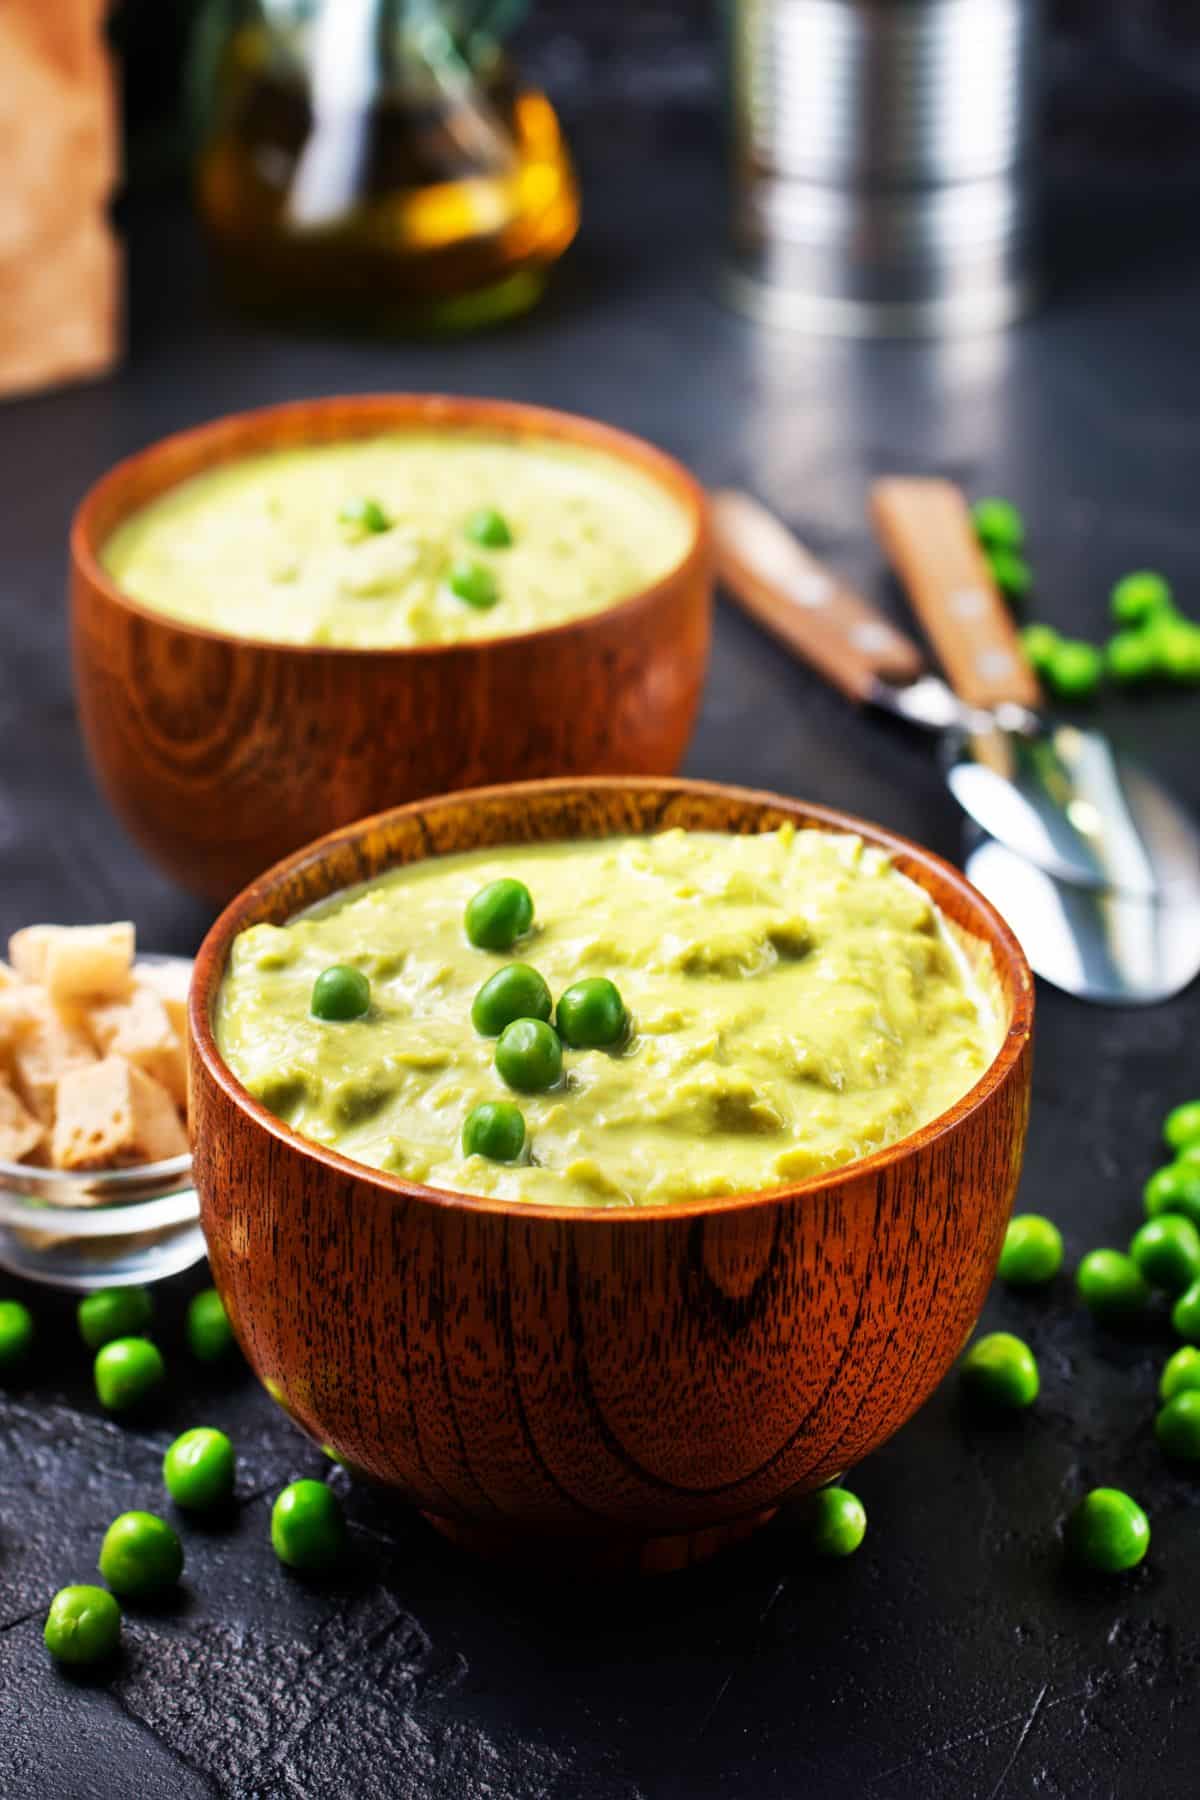 mashed peas in wooden bowl.